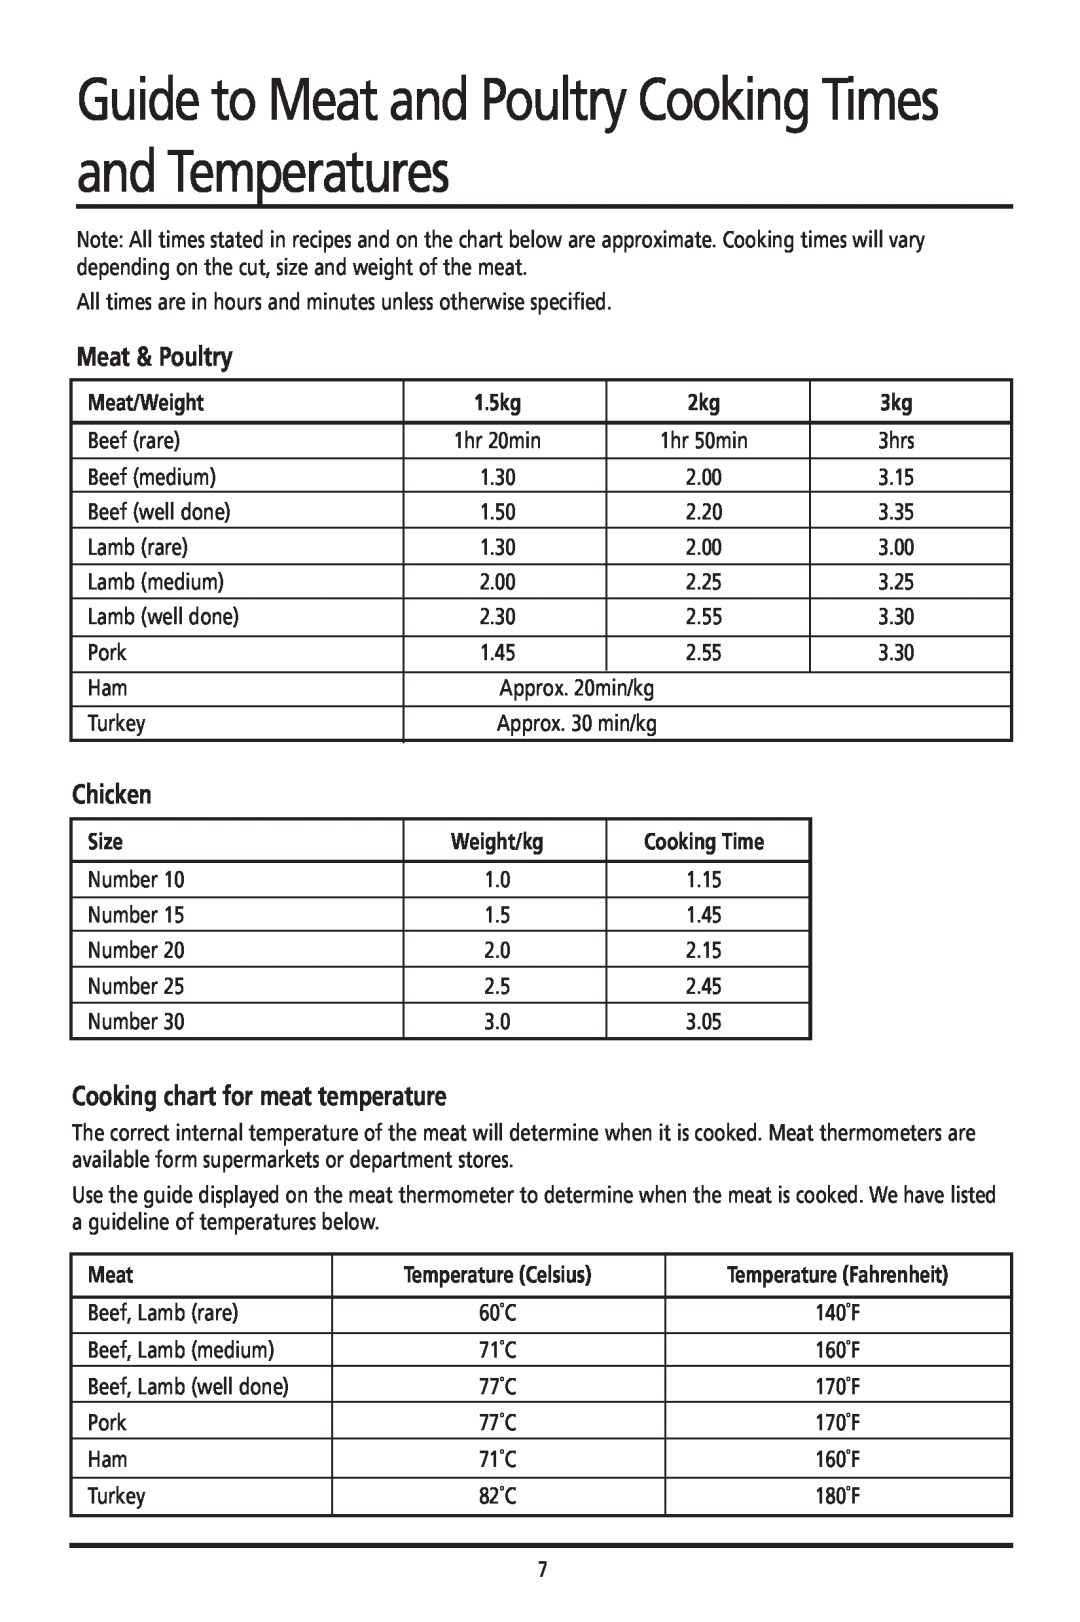 Sunbeam HG6600 Guide to Meat and Poultry Cooking Times and Temperatures, Meat & Poultry, Chicken, Meat/Weight, 1.5kg, Size 